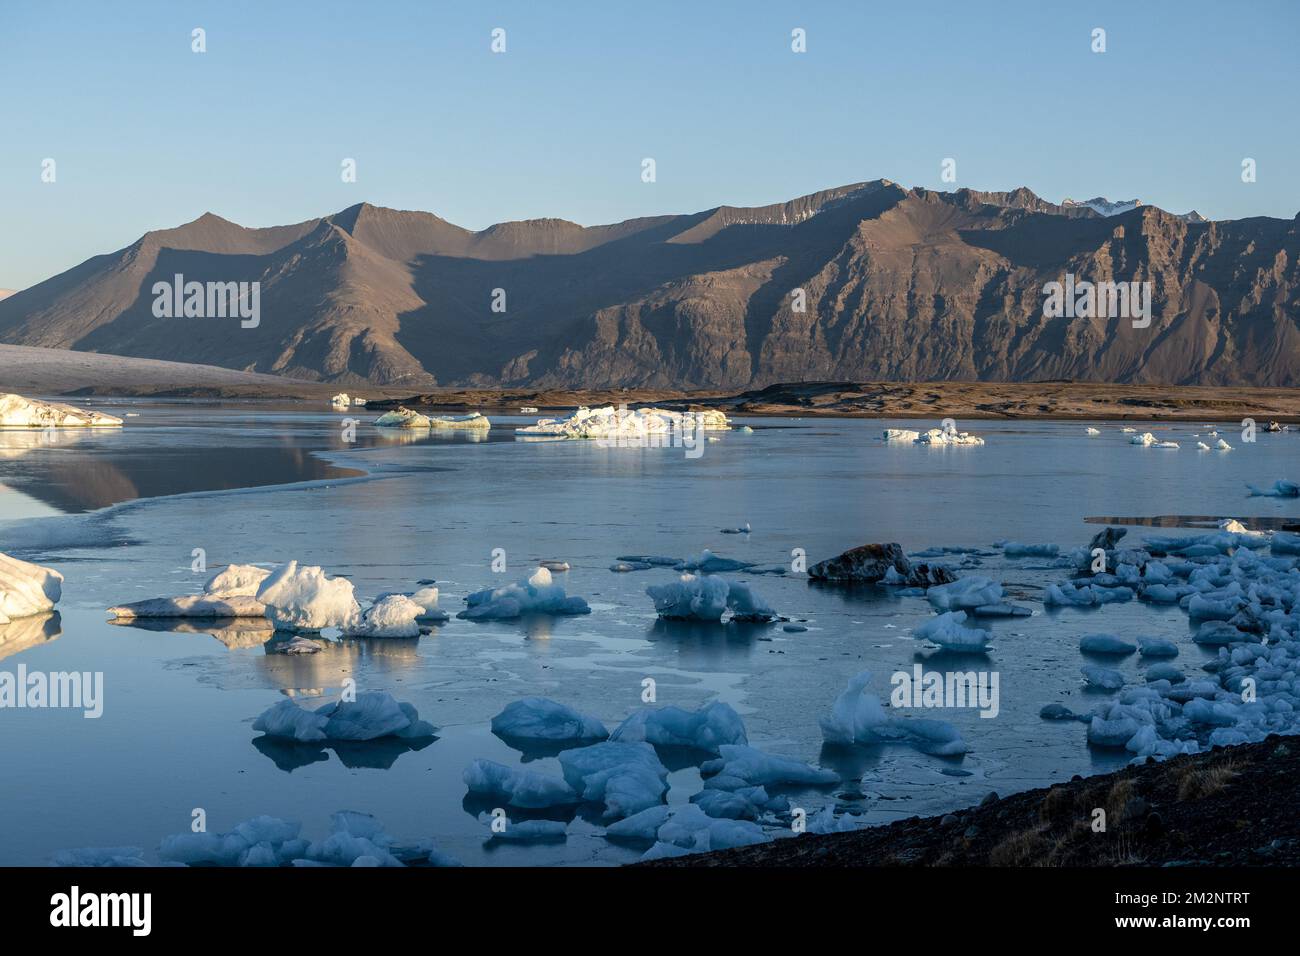 October 18, 2022, JÃ¶kulsÃrlÃ³n, JÃ¶kulsÃrlÃ³n, Iceland: General view of JÃ¶kulsÃrlÃ³n lake with glaciers and small ice formations. JÃ¶kulsÃrlÃ³n is a lake located in southern Iceland, with an area of 20 km2 and a depth of over 200 meters. Until less than 100 years ago, the BreiÃ°amerkurjÃ¶kull glacier (part of the VatnajÃ¶kull glacier) extended even beyond the ring road. Due to rising temperatures, the glacier has retreated, creating this impressive glacial lagoon. (Credit Image: © Jorge Castellanos/SOPA Images via ZUMA Press Wire) Stock Photo